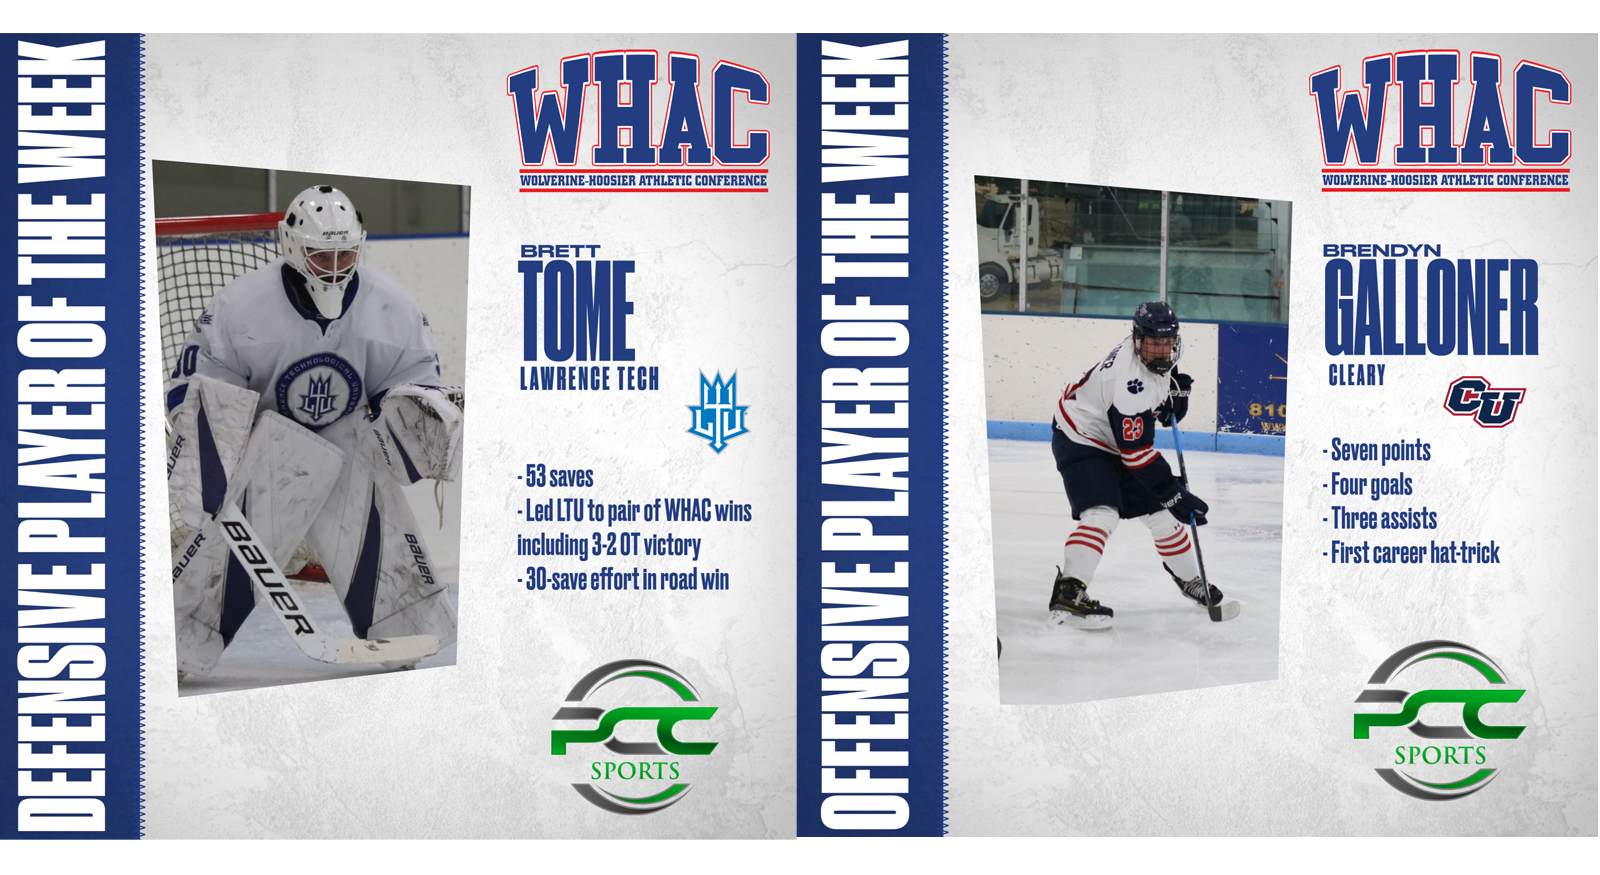 LTU's Tome, Cleary's Galloner win WHAC Weekly Honors